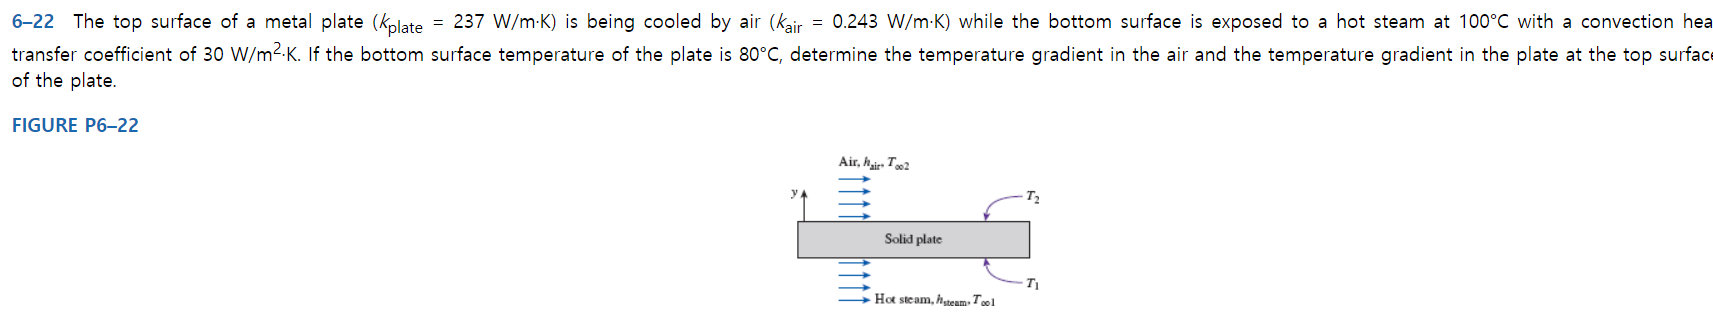 = 0.243 W/m K) while the bottom surface is exposed to a hot steam at 100°C with a convection hea
6-22 The top surface of a metal plate (kplate = 237 W/m-K) is being cooled by air (kair
transfer coefficient of 30 W/m2-K. If the bottom surface temperature of the plate is 80°C, determine the temperature gradient in the air and the temperature gradient in the plate at the top surface
of the plate.
FIGURE P6-22
Air, hi To
T2
Solid plate
TI
Hot steam, hteam. Tool
